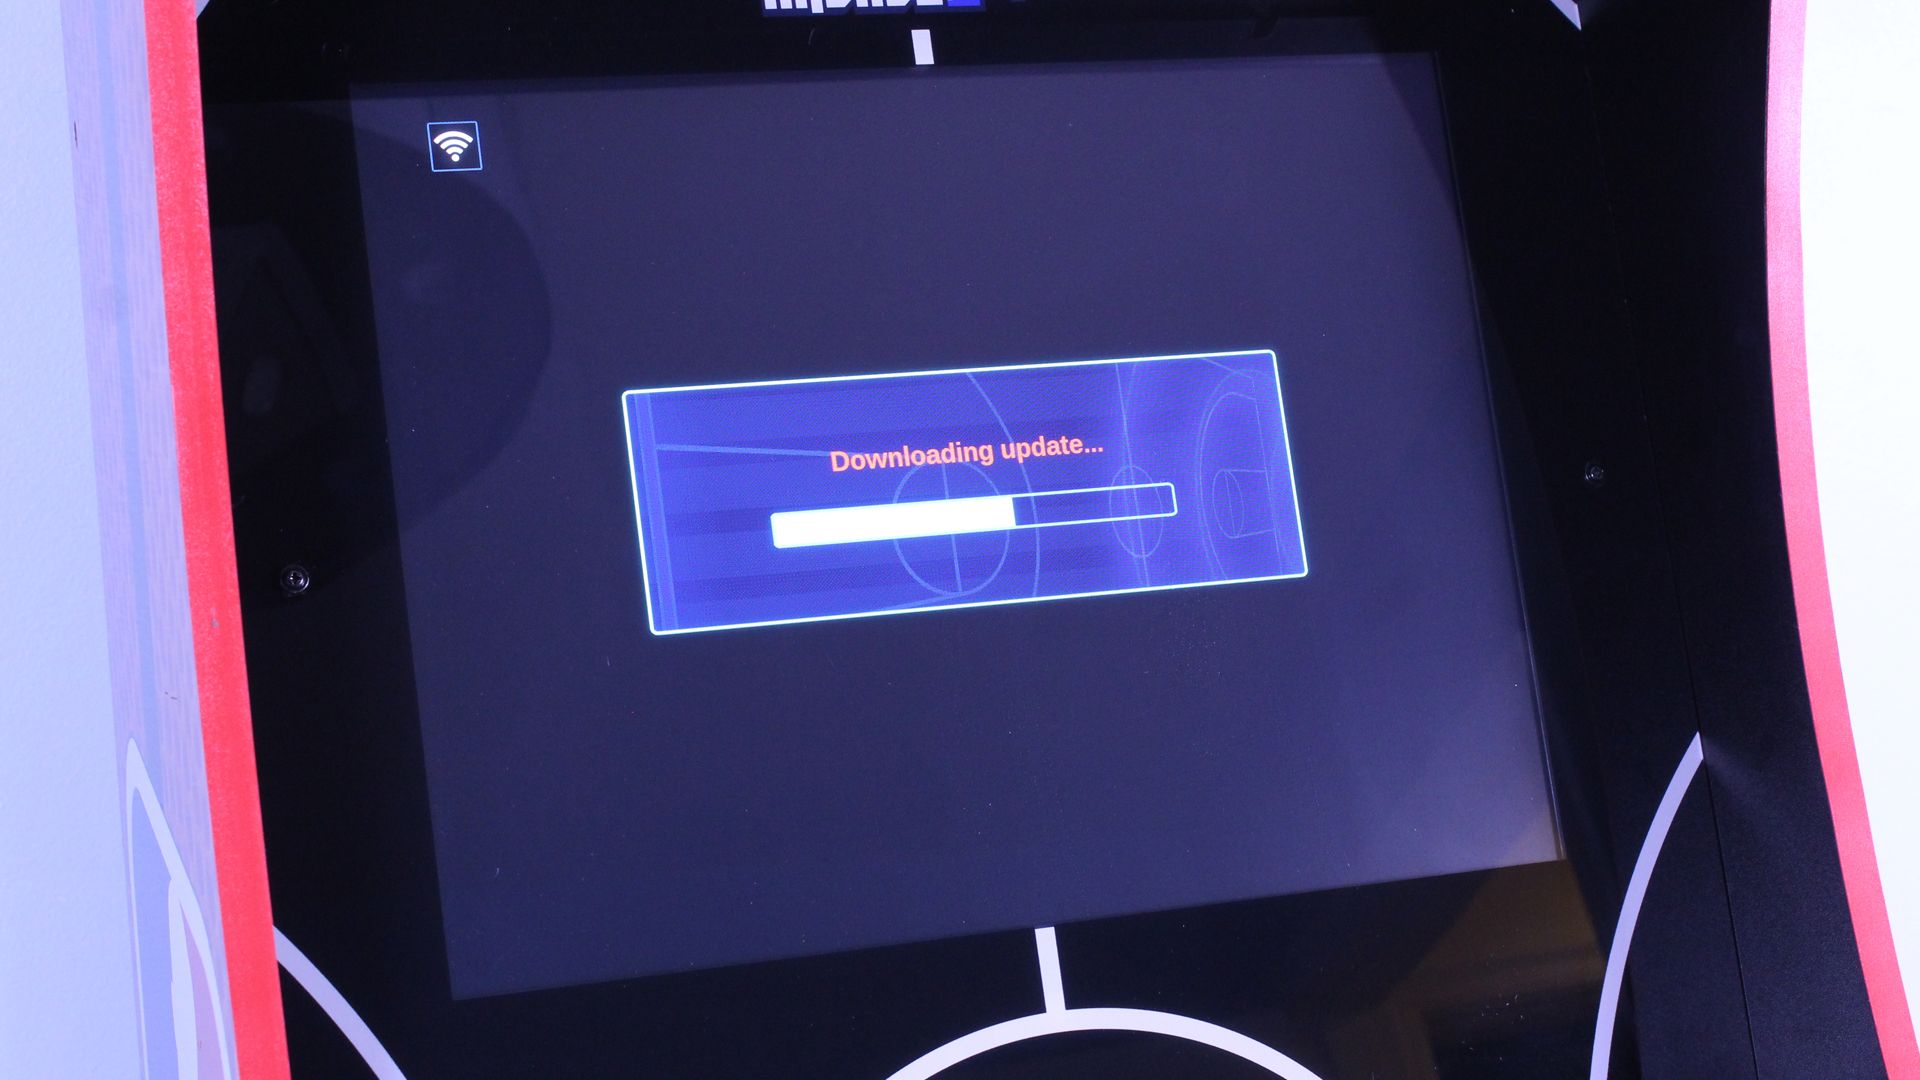 The NBA Jam machine with a &quot;downloading update&quot; dialog